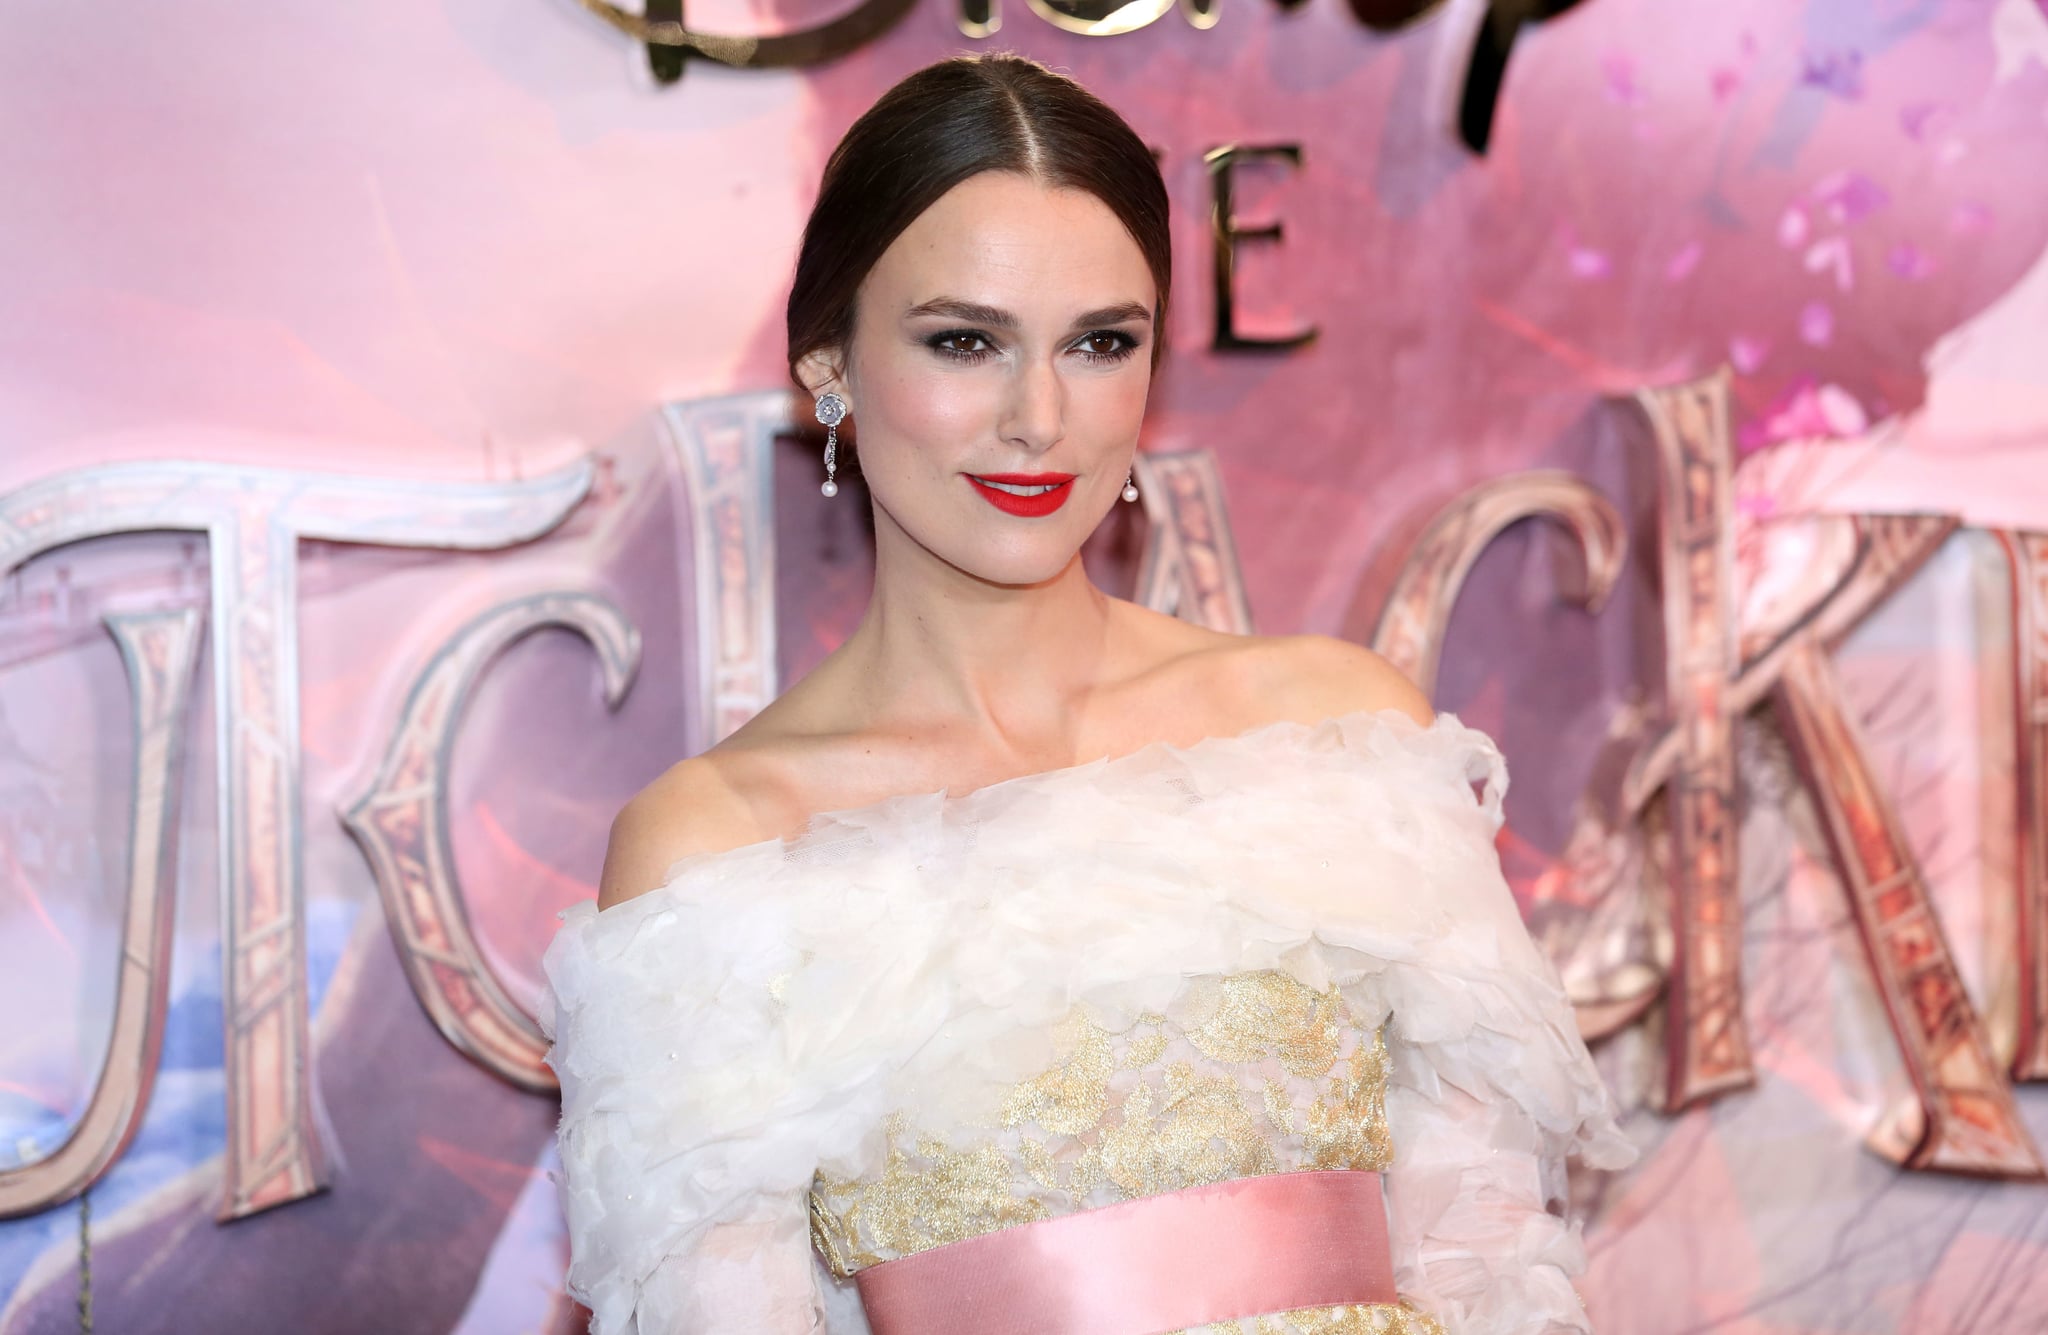 Keira Knightley attending the European Premiere of The Nutcracker and the Four Realms held at the Vue, Westfield London. (Photo by David Parry/PA Images via Getty Images)